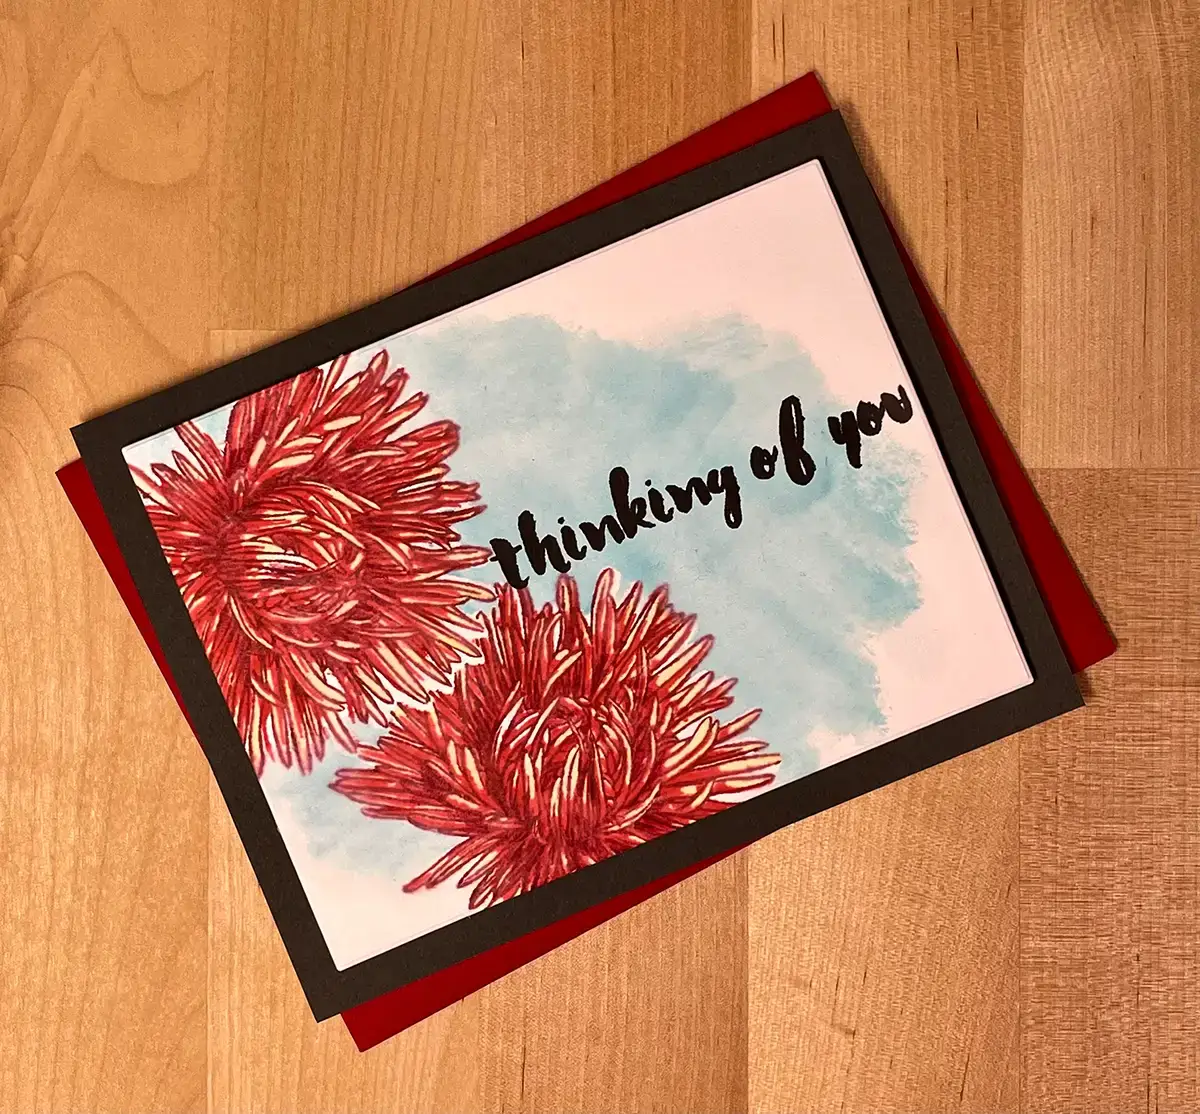 Using masking methods, a card is beautifully designed with red flowers and the heartfelt words "thinking of you.